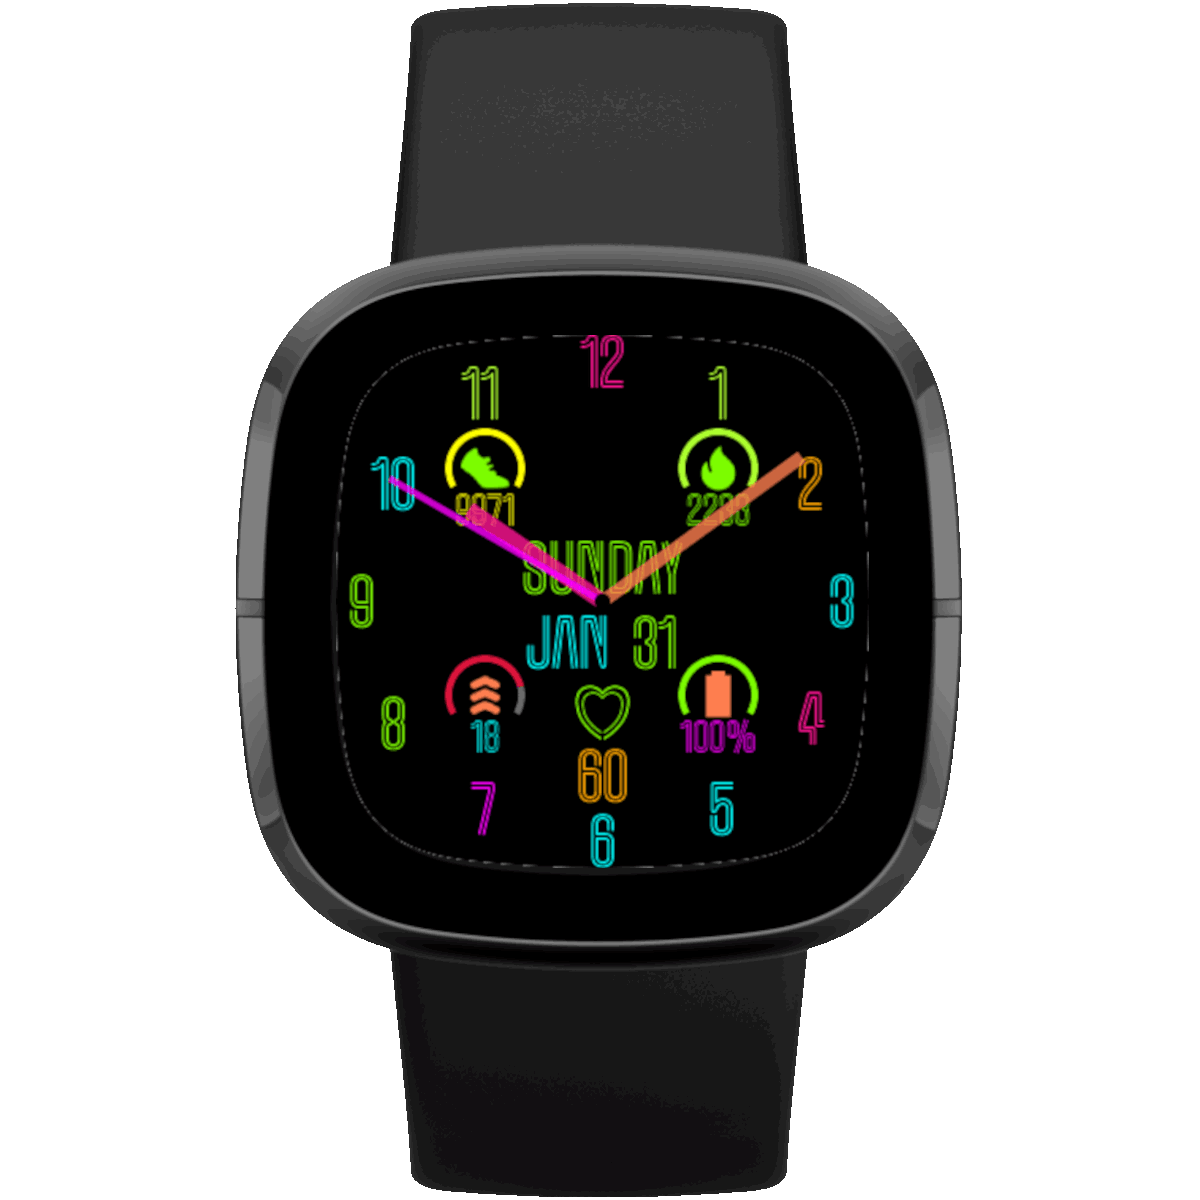 Neon Flash Analog Animated Colorful Watch Face